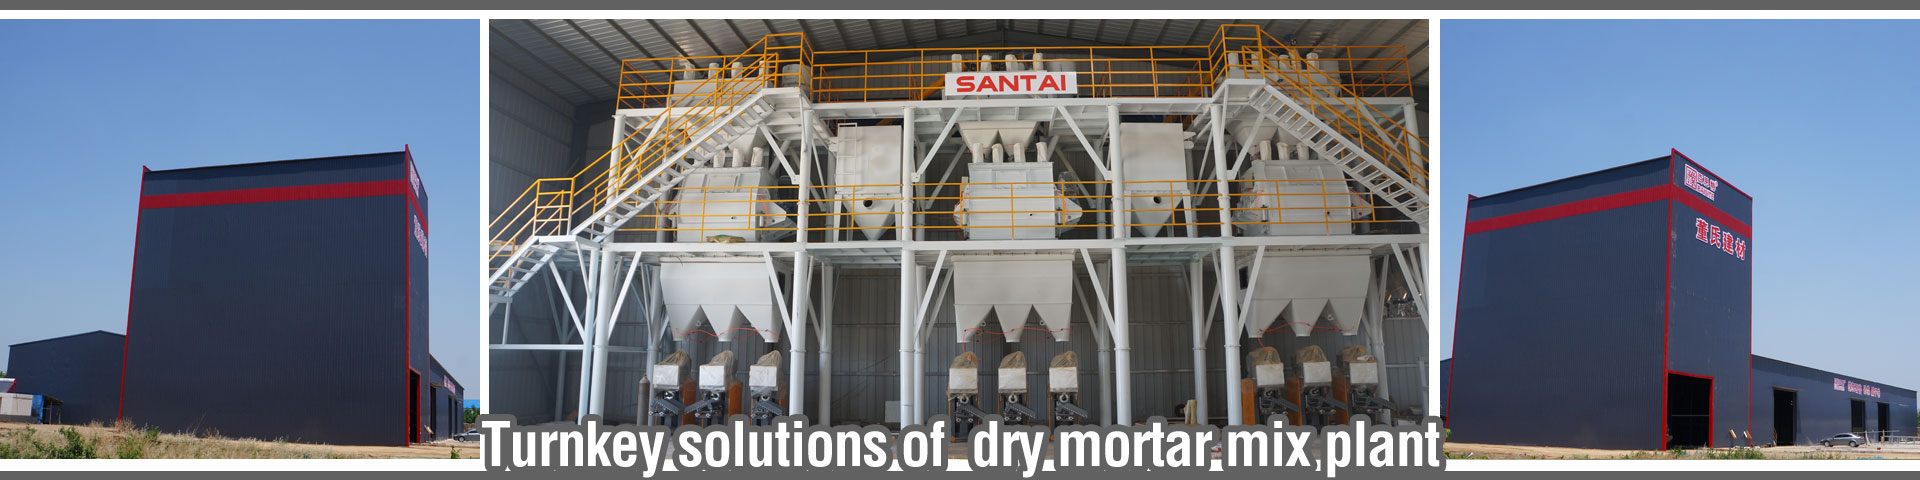 turnkey-solutions-dry-mortar mix plant manufacturer